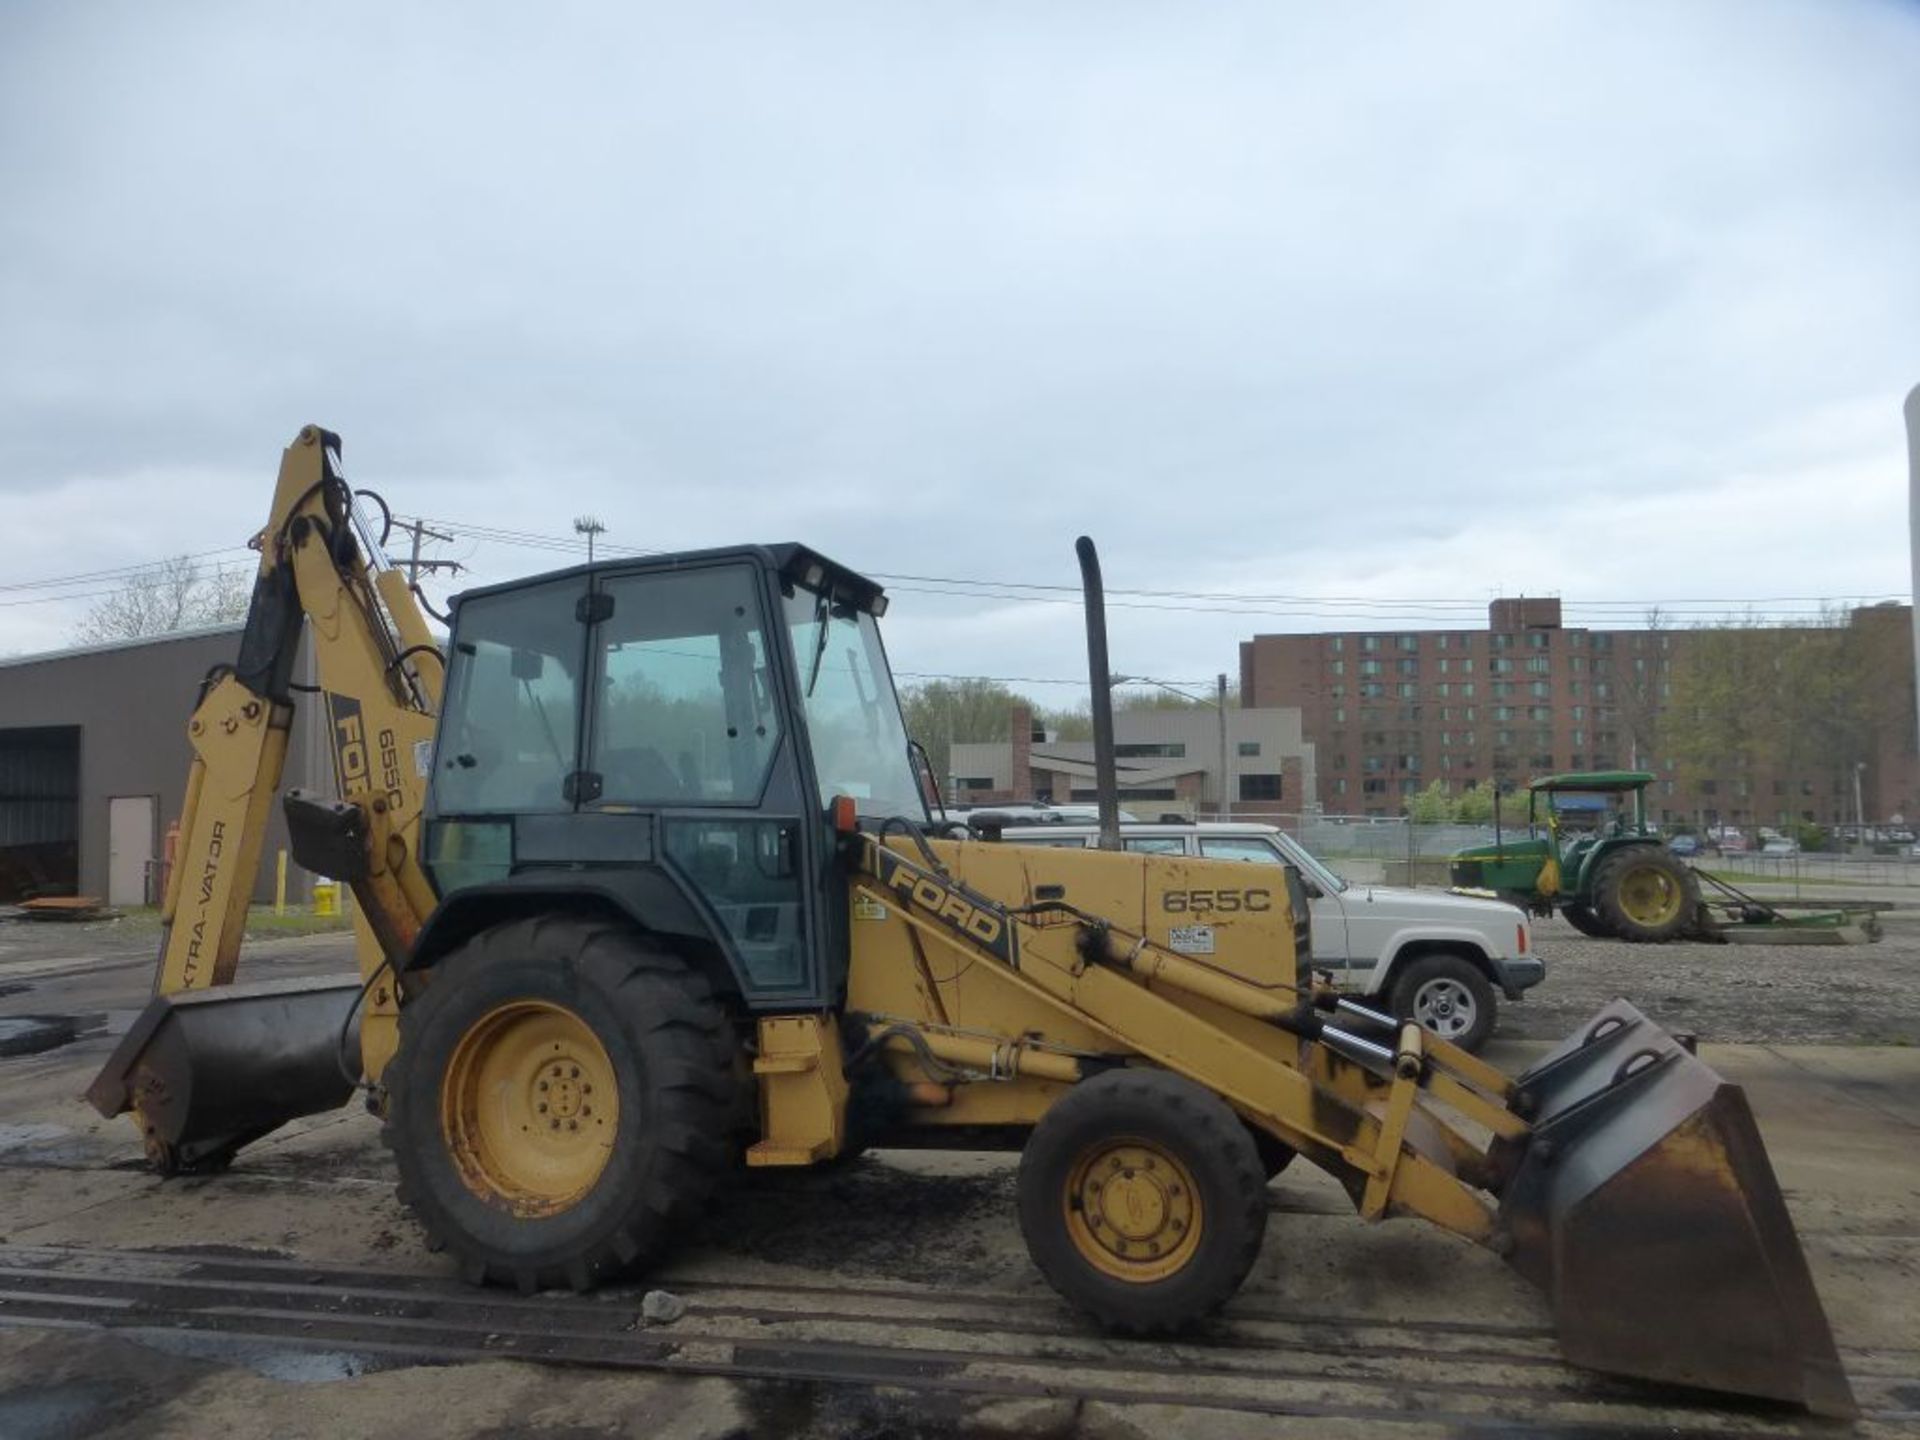 Ford 655C Backhoe | Model No. LF3P1Z; Serial No. A406839; 4877 Hours; 88" Wide Bucket; Manual